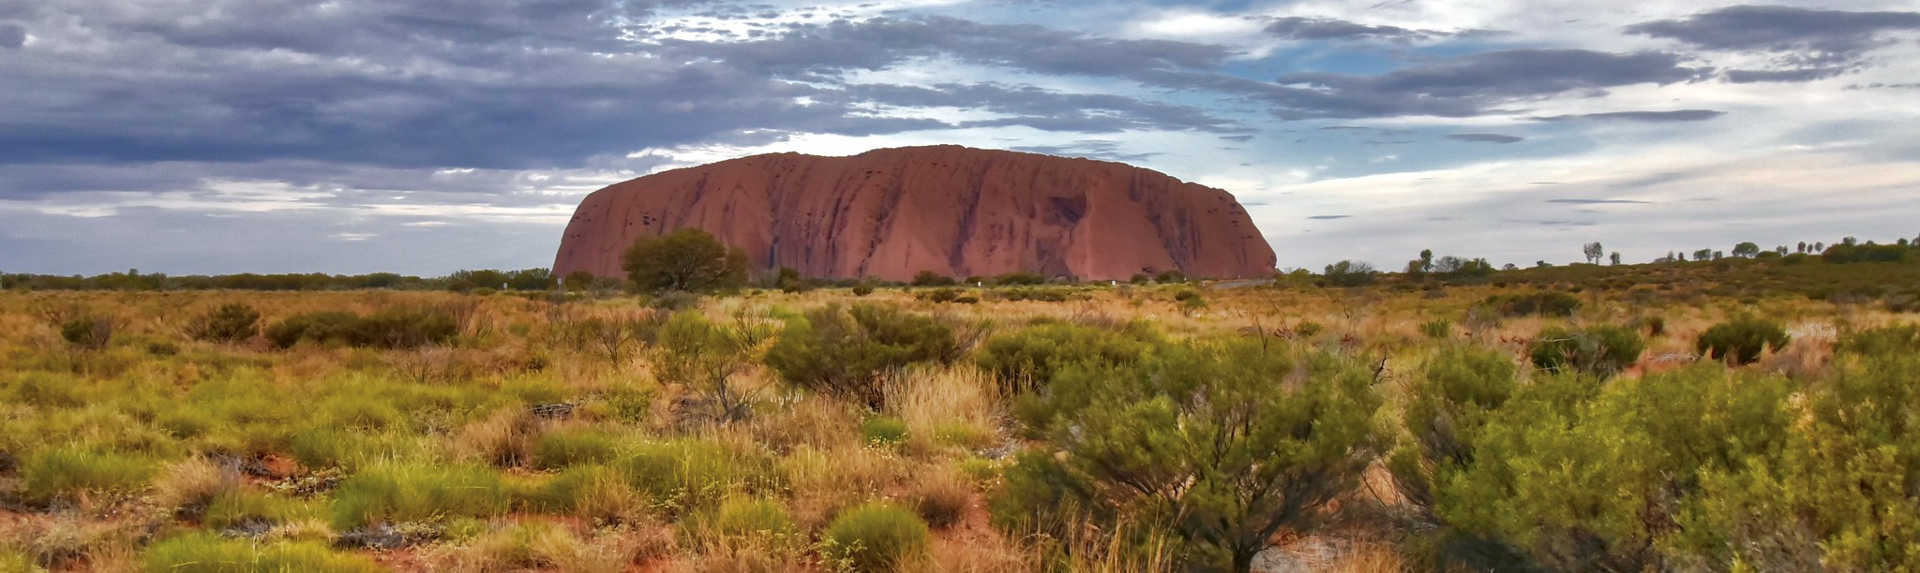 Does Uluru get cold at night?